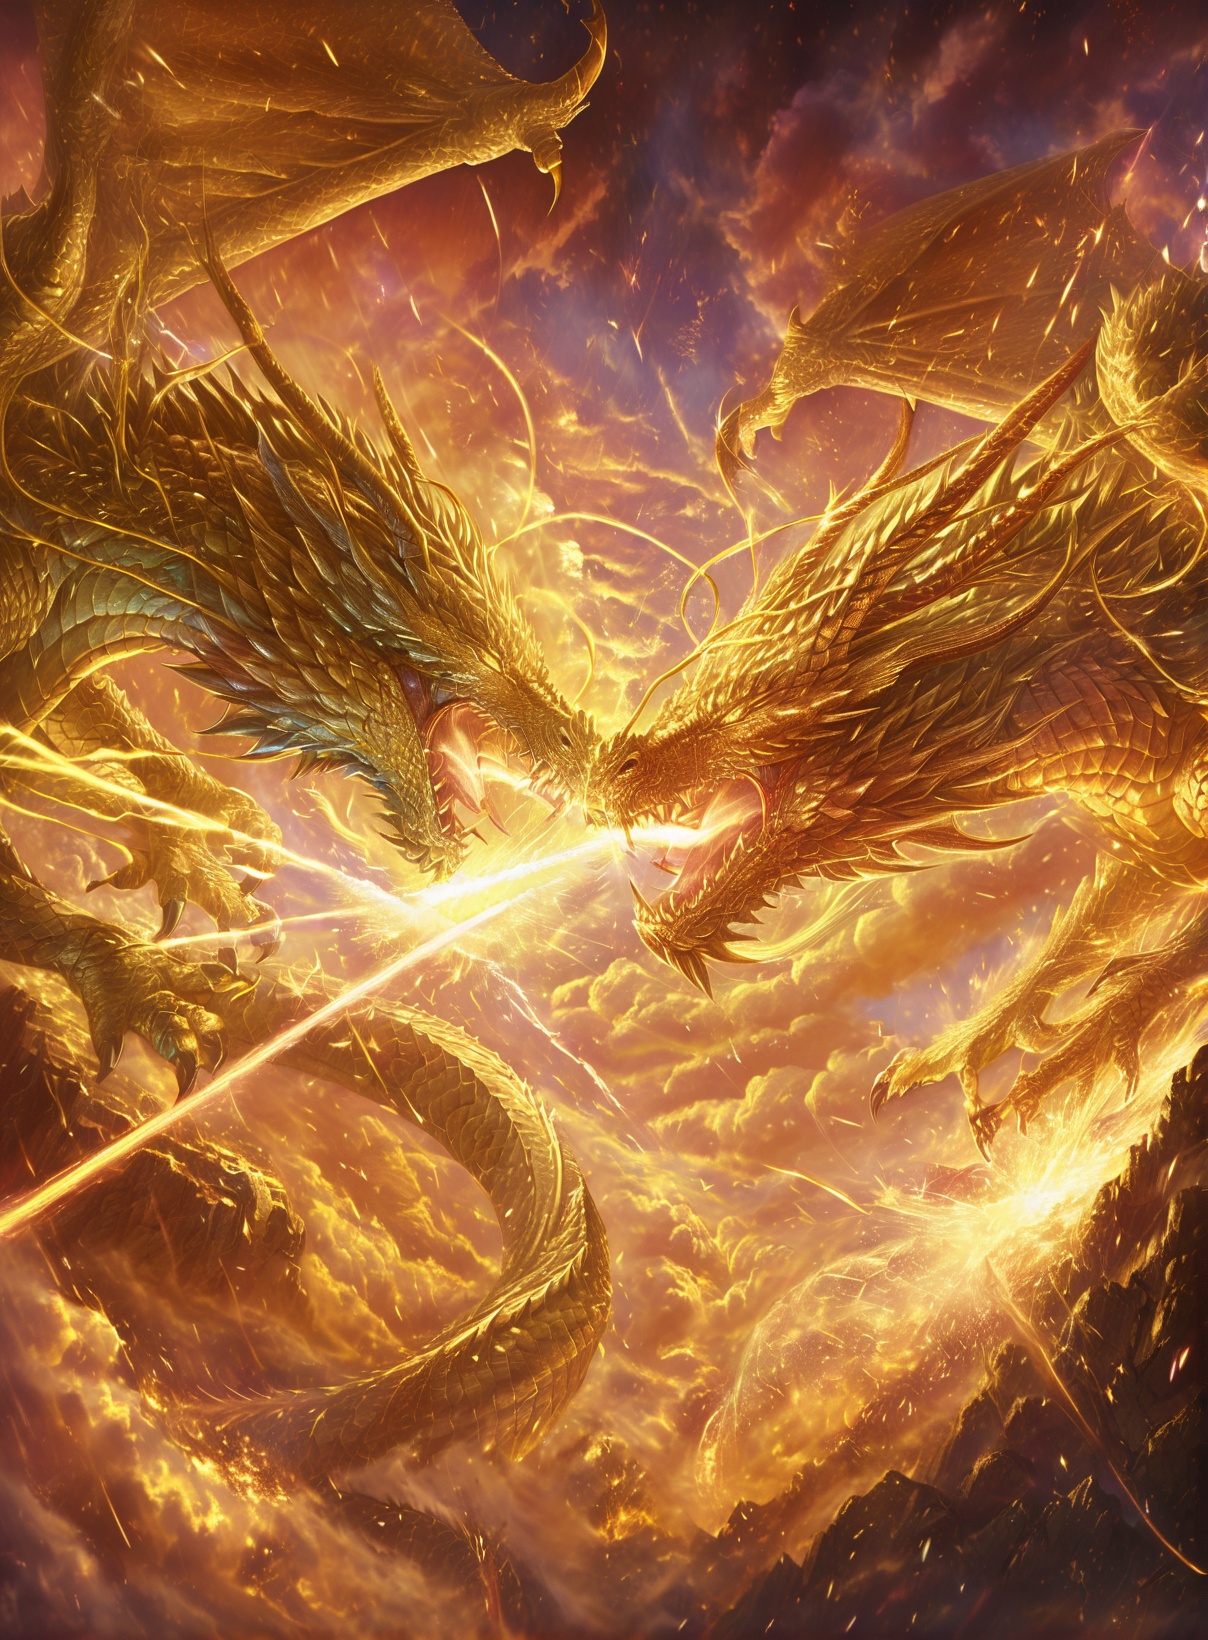 a dramatic and intense scene of two massive dragons clashing heads. The dragons are intricately detailed, with scales, sharp claws, and fiery eyes. They are surrounded by a fiery, golden aura, with sparks flying around them. The backdrop is a tumultuous sky with swirling clouds, and the dragons appear to be on a rocky terrain. The overall atmosphere is one of chaos, power, and conflict<lora:KING Gardon-000010:1>